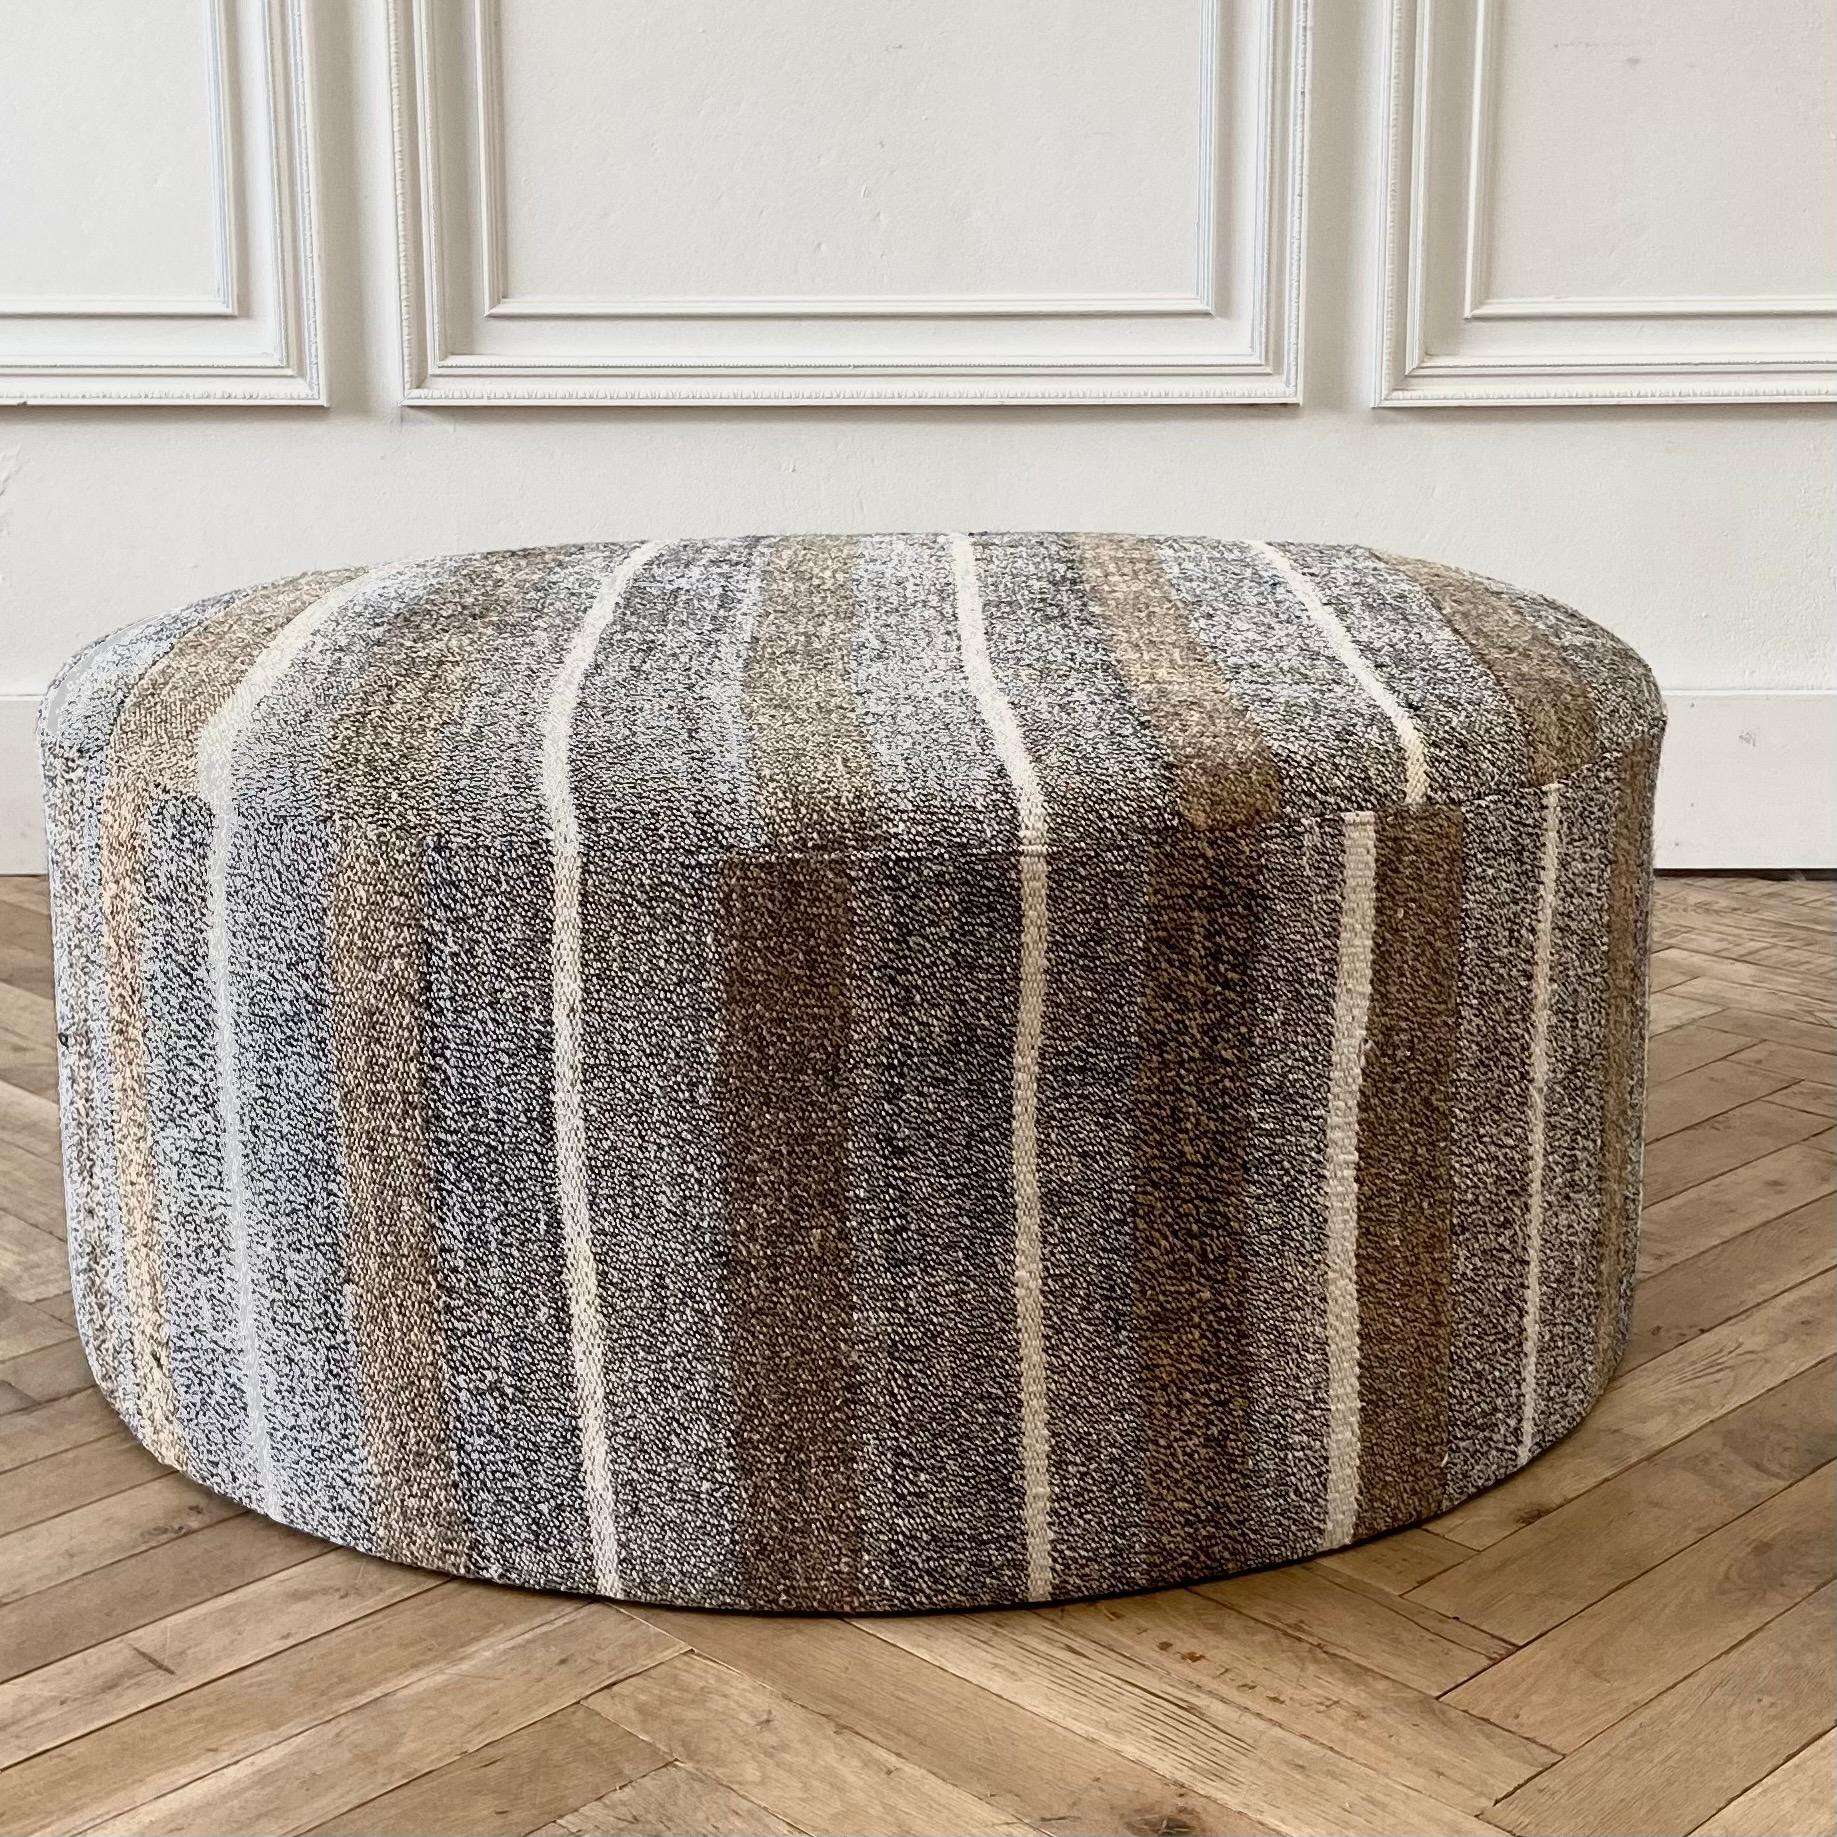 Custom made vintage Turkish rug round cocktail ottoman coffee table 
Measures: 41? round x 17? height 
Once a stripe rug now a useful cocktail ottoman. Wool and goat hair rug in a greyish, brown, golden tones with white woven striped